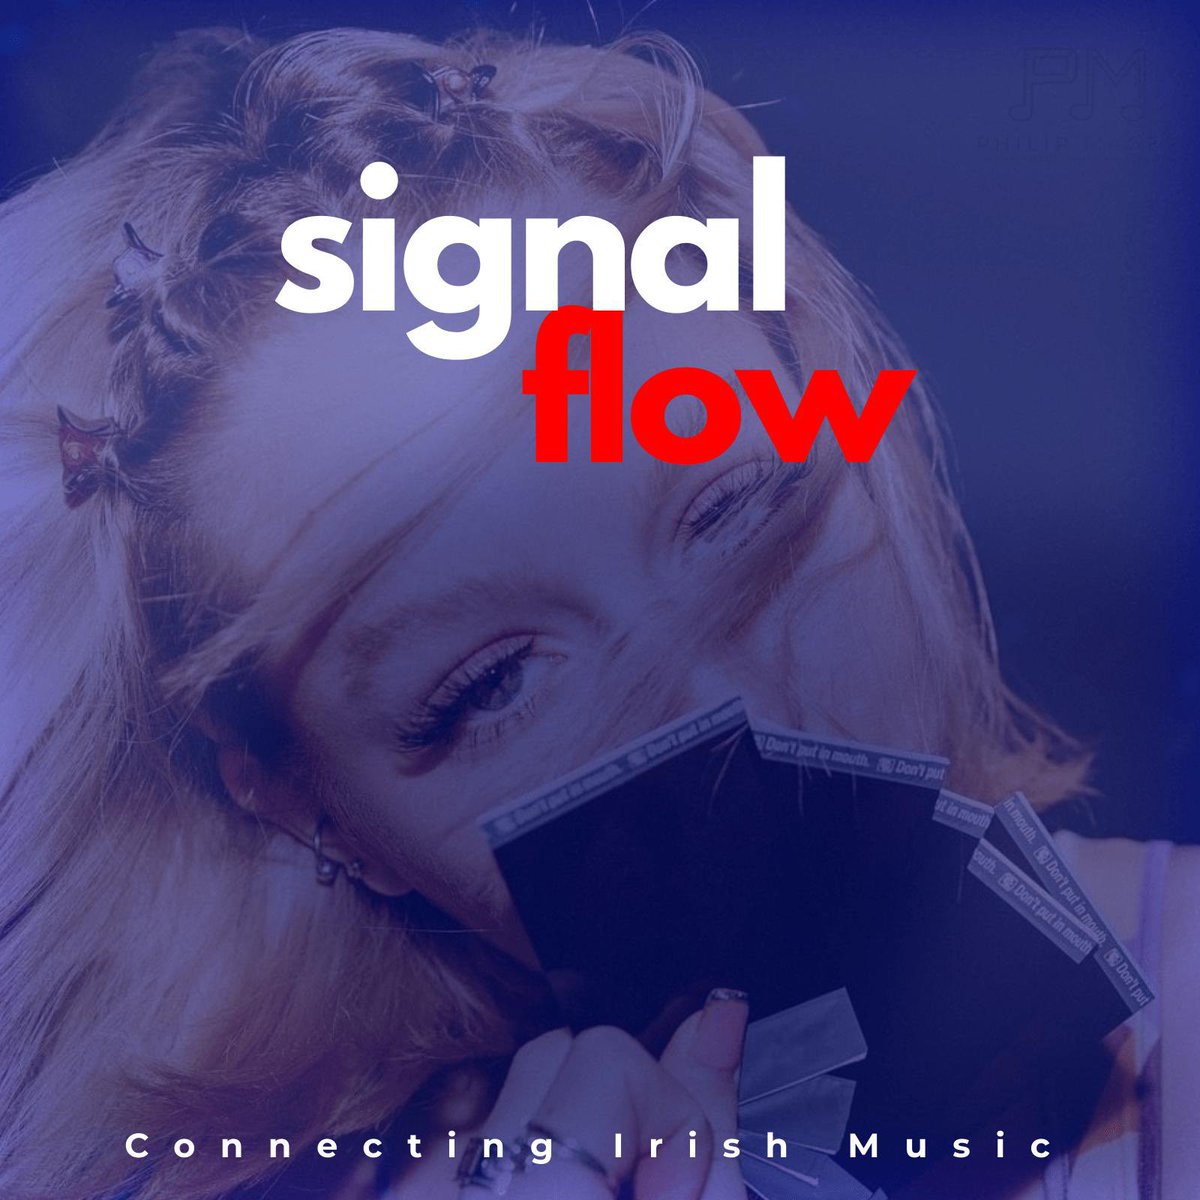 Signal Flow Update🎶 Back again with another playlist update with lots of amazing Irish music we’re loving as always💯 Curated by myself and @philipmagee Follow on Spotify ➡️ sptfy.com/9eqP Cover ➡️ @sophdoyleryder (latest single ‘All I Have’) #NewMusicFriday